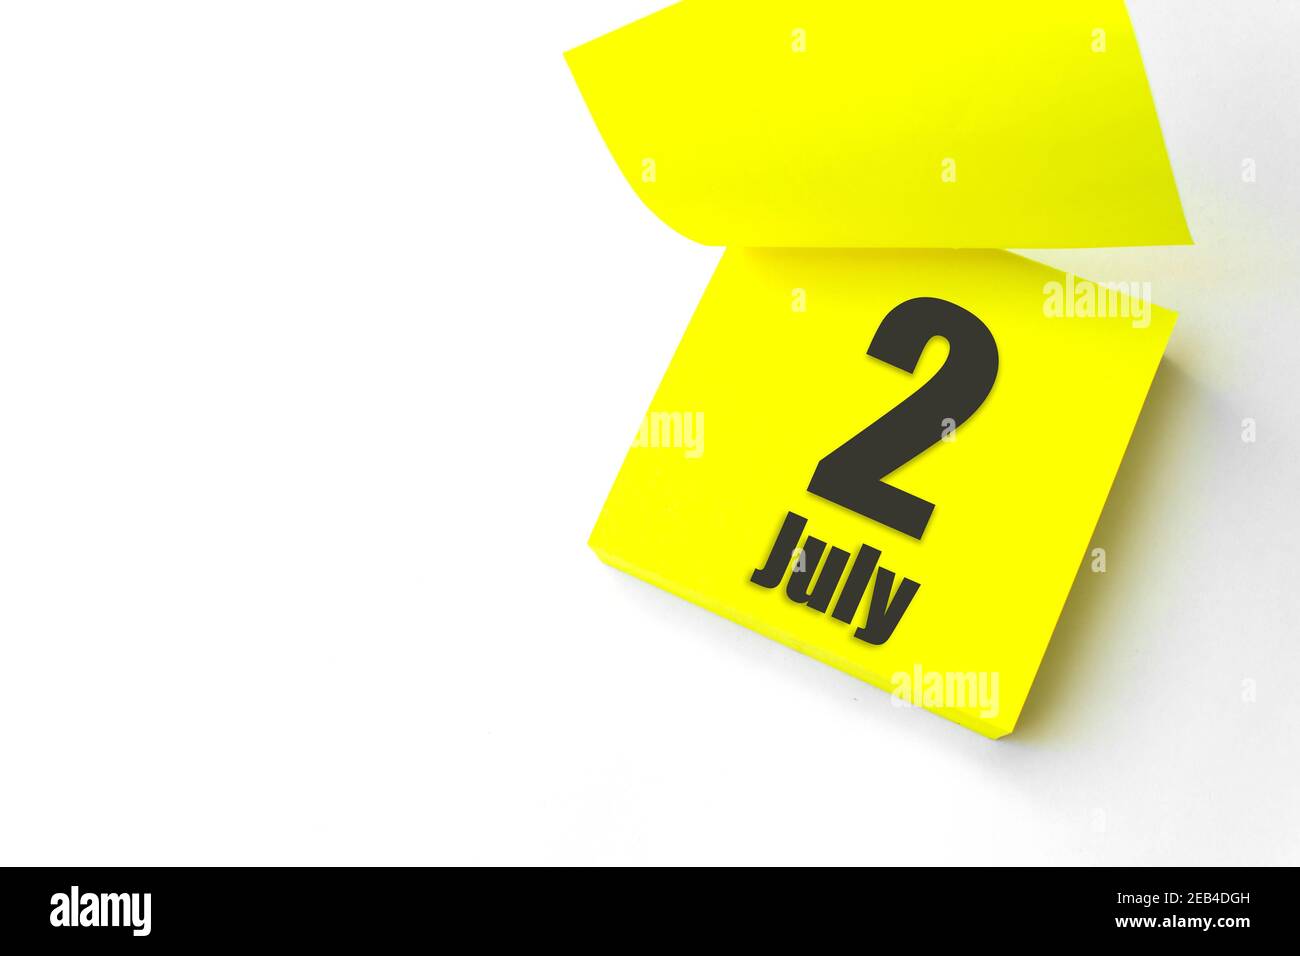 July 2nd. Day 2 of month, Calendar date. Close-Up Blank Yellow paper reminder sticky note on White Background. Summer month, day of the year concept Stock Photo